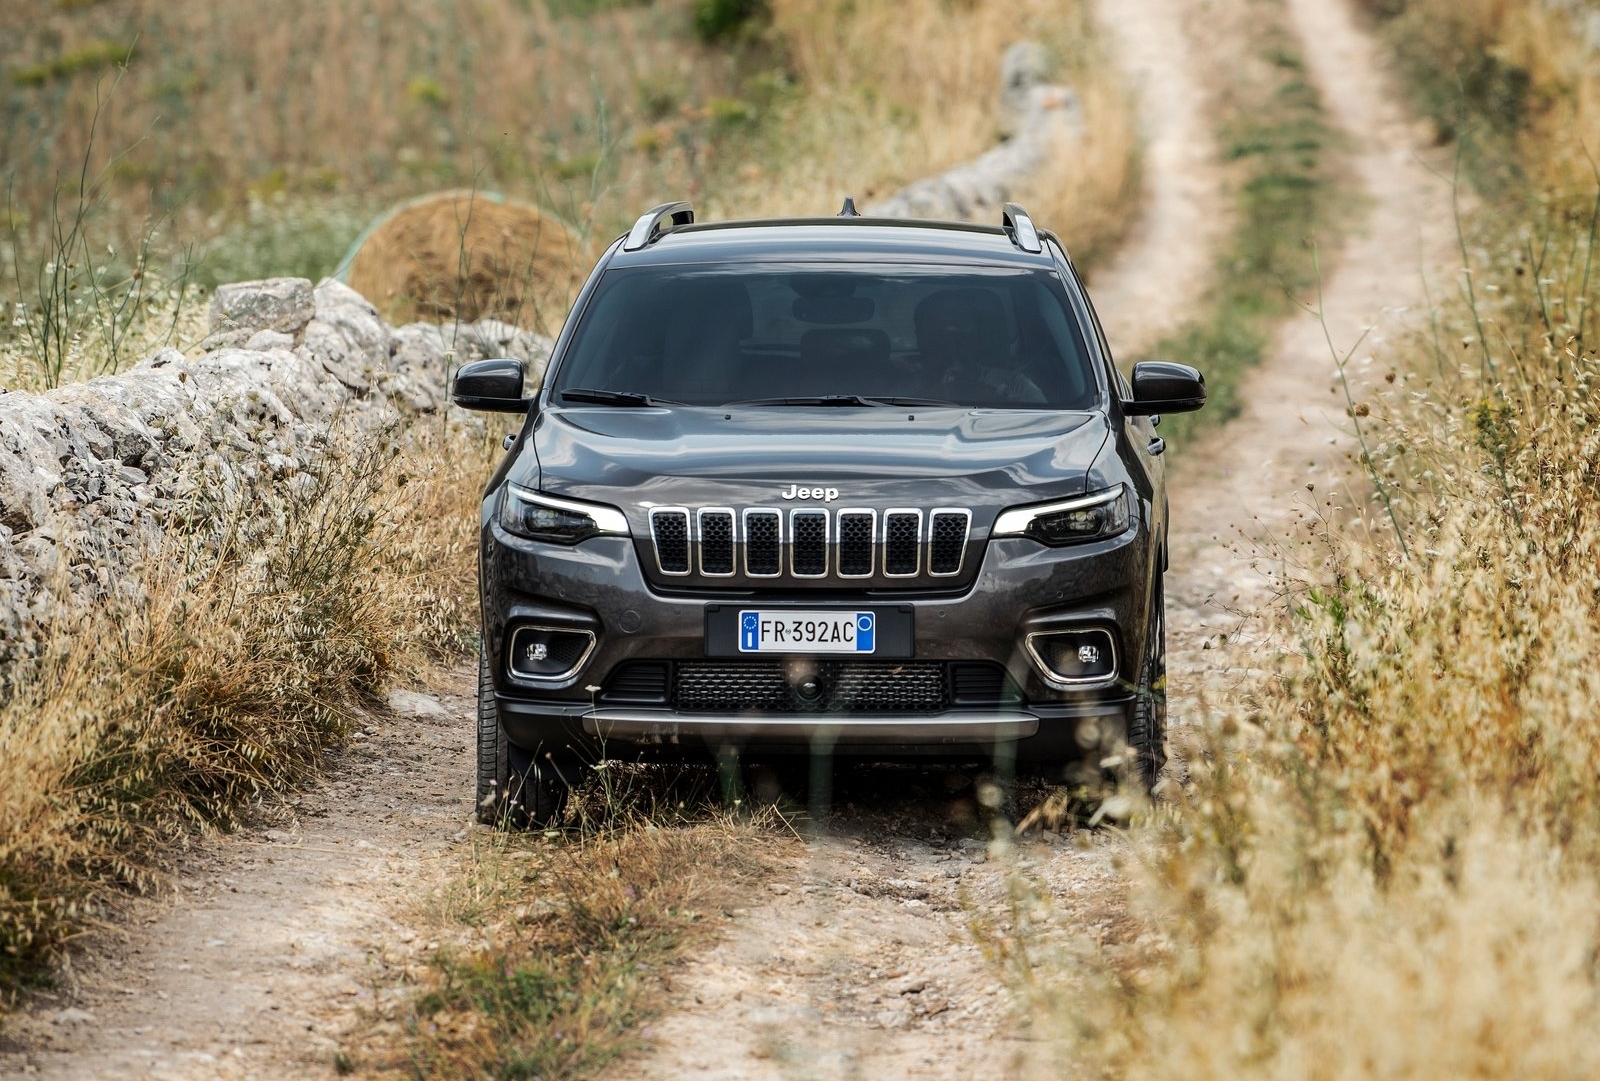 Jeep Cherokee 2019 - Offroad